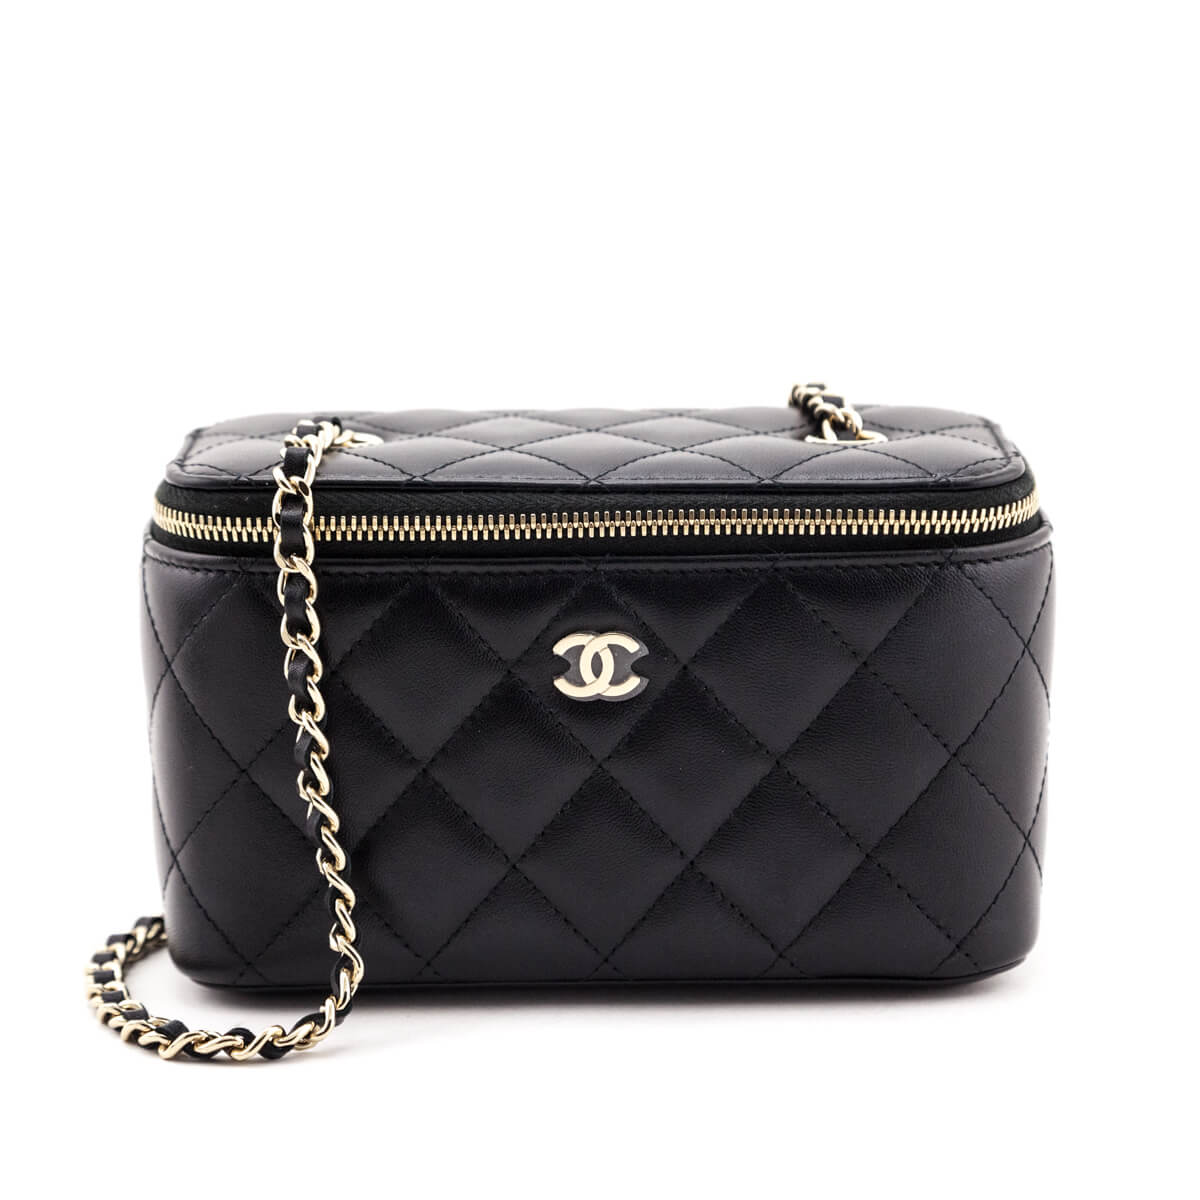 Chanel Black Lambskin Small Vanity With Classic Chain - Love that Bag etc - Preowned Authentic Designer Handbags & Preloved Fashions